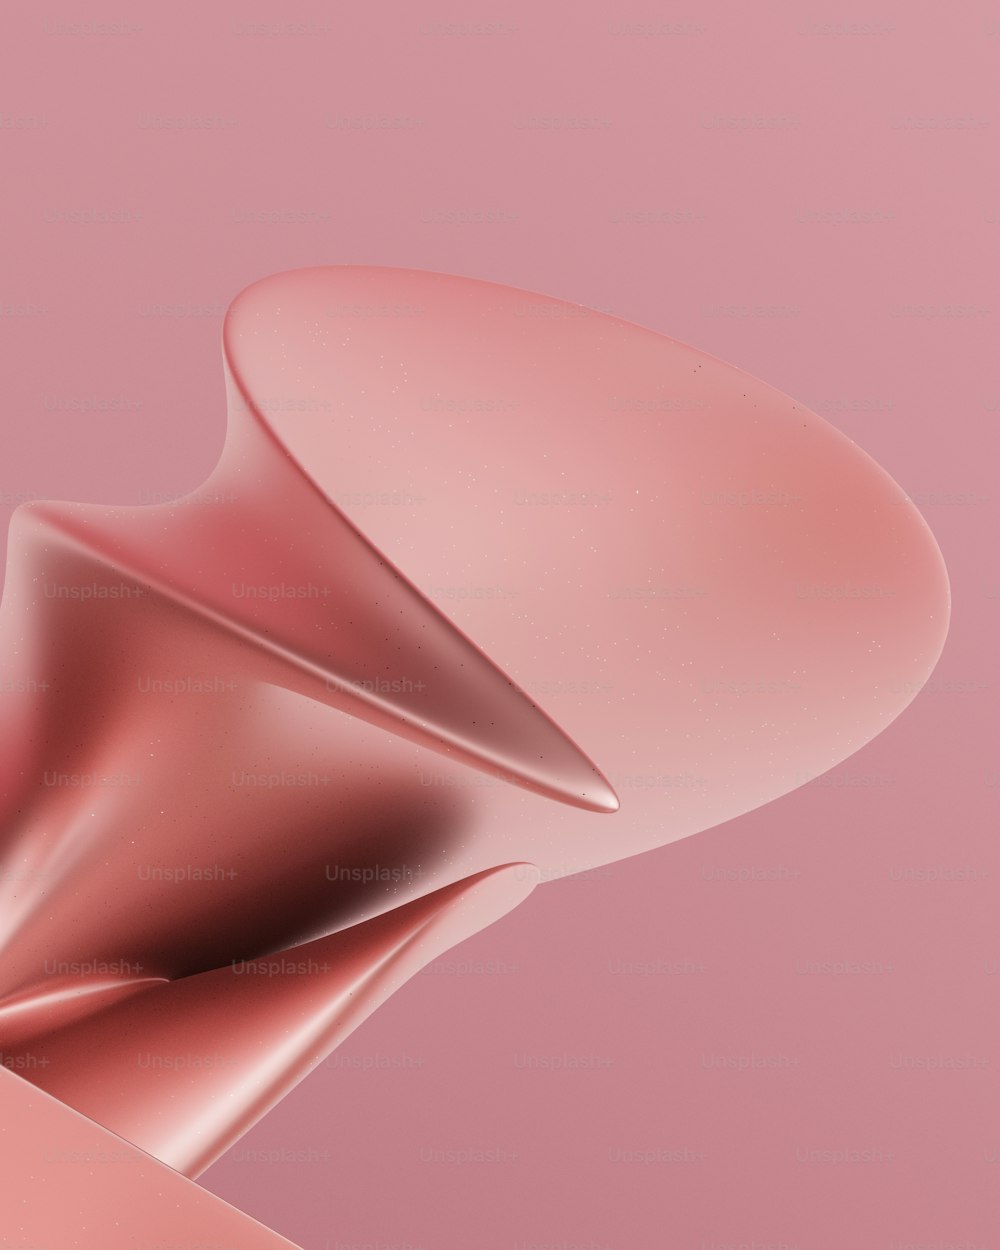 a close up of a pink object on a pink background